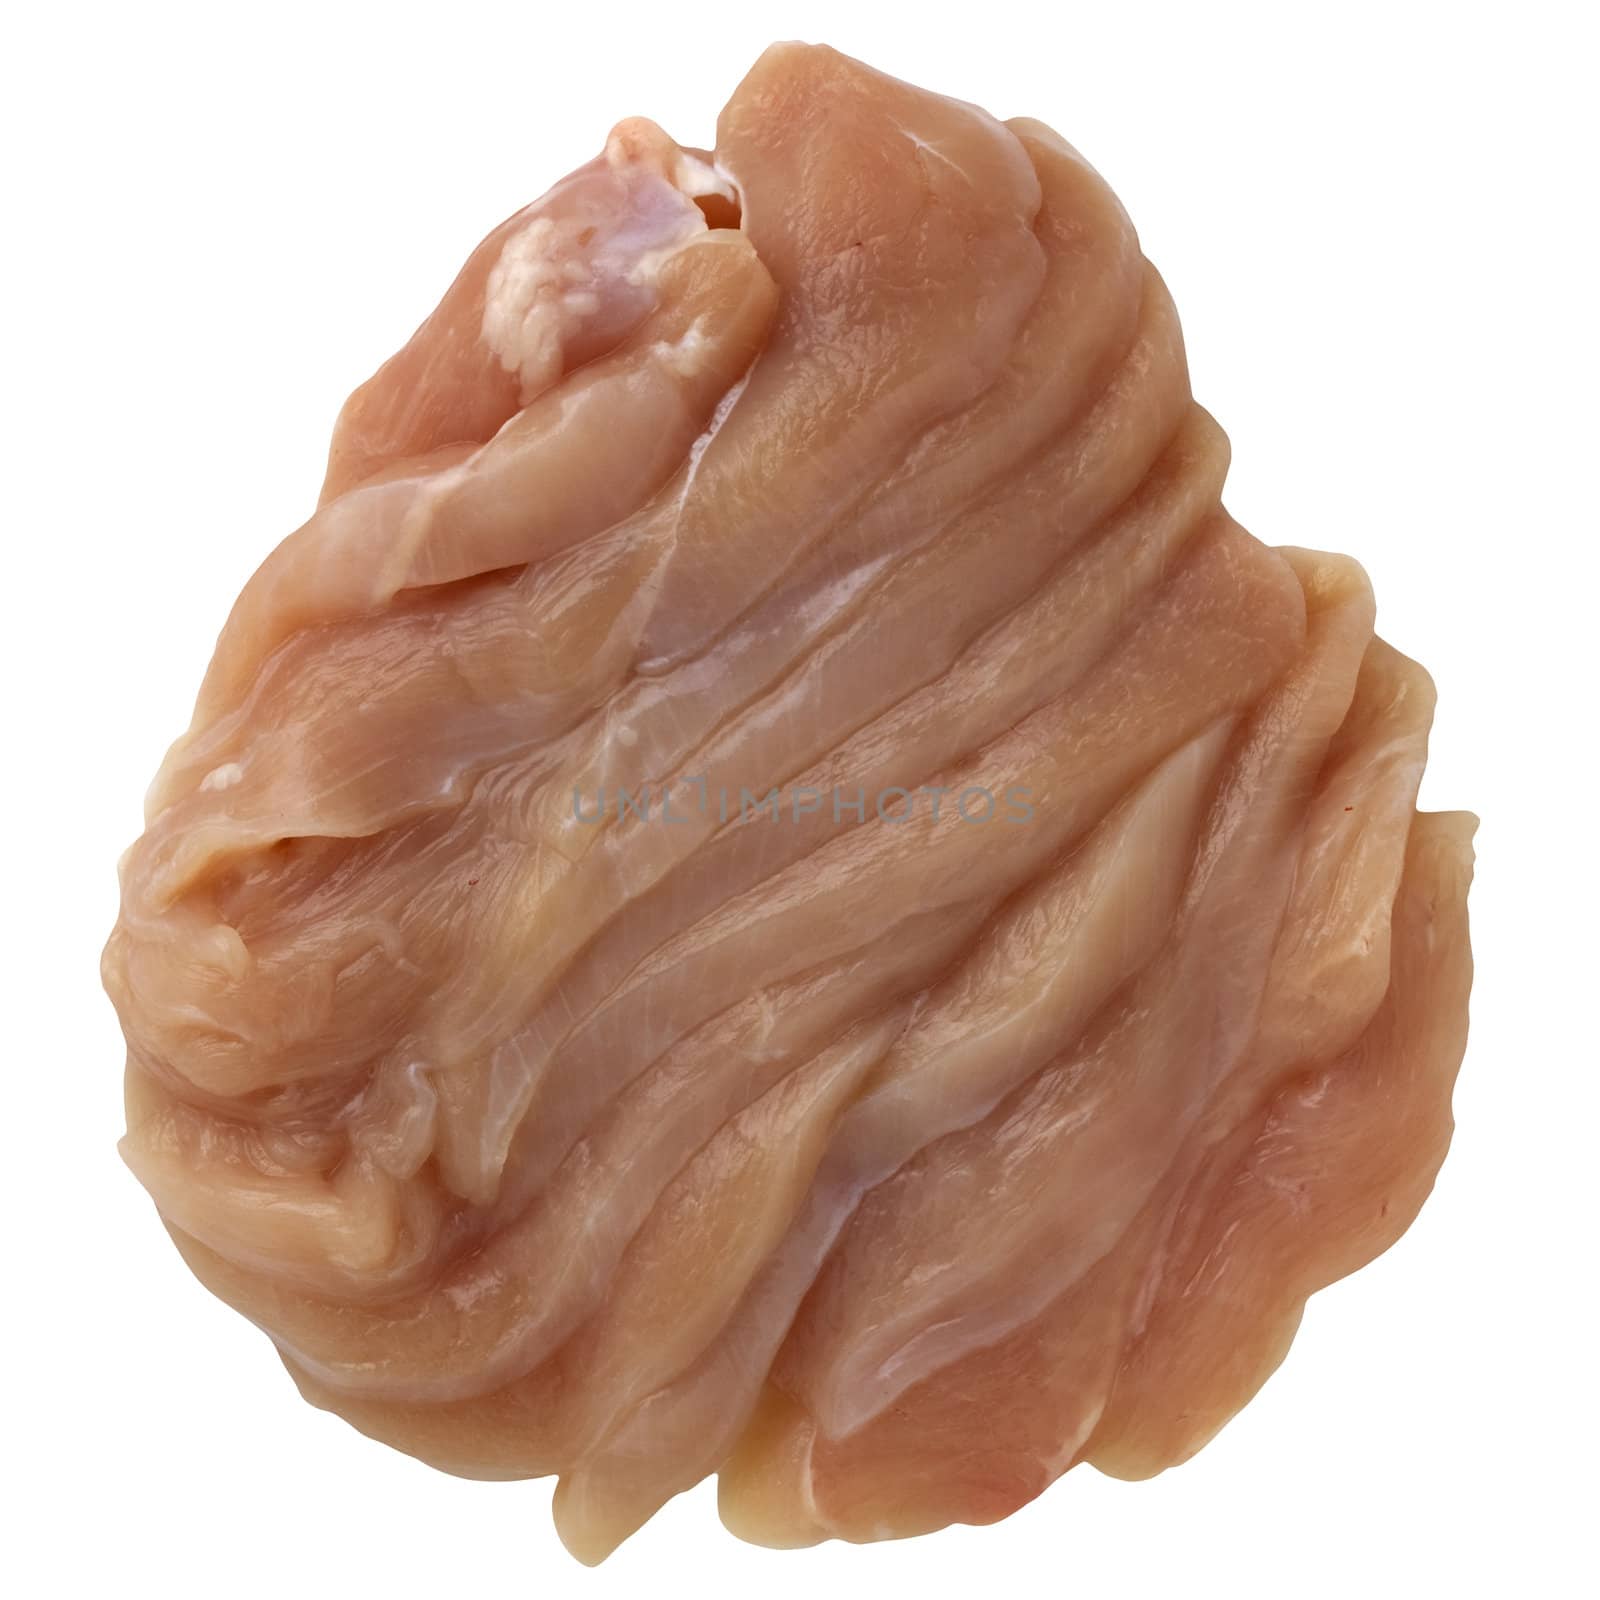 chicken breast sliced for stir fry; isolated on white with clipping path